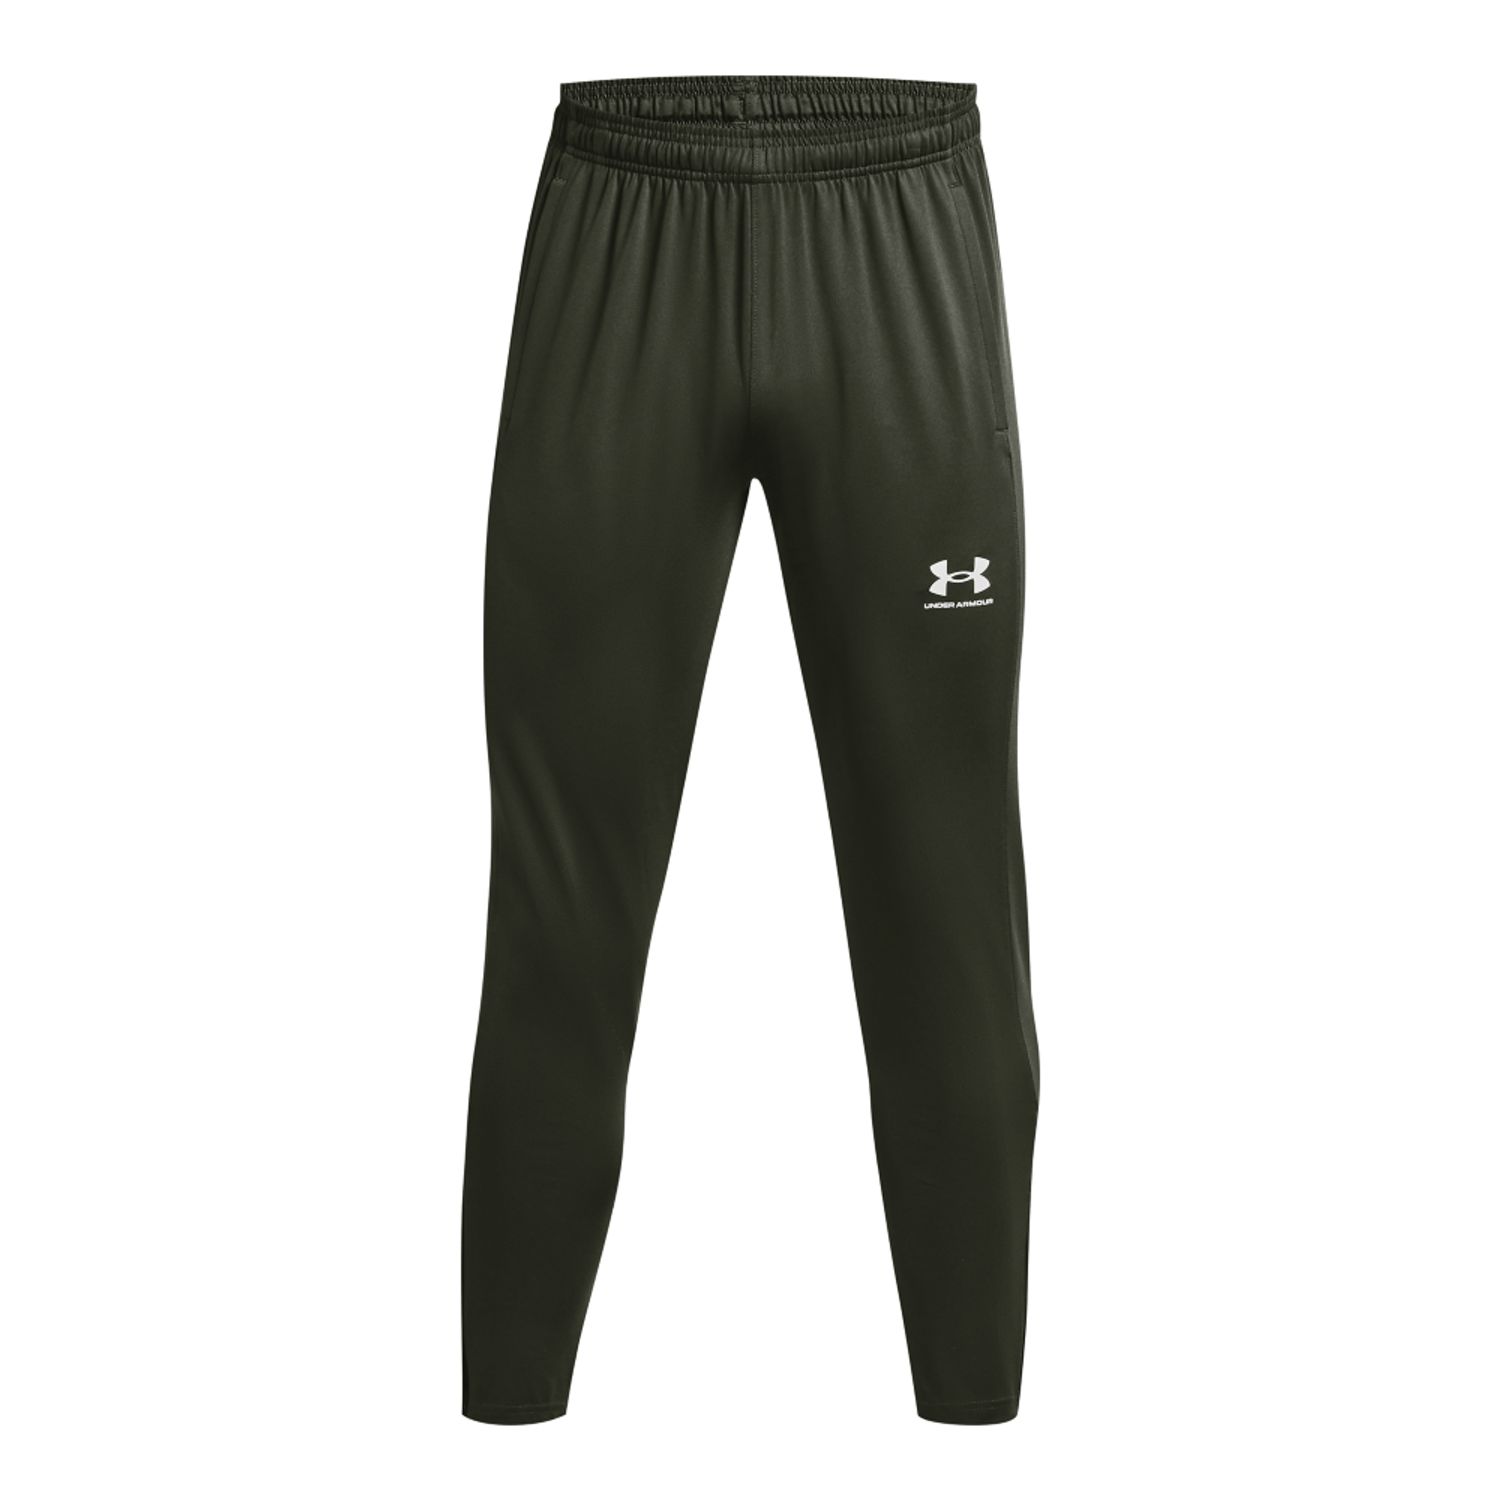 Green Under Armour Mens Challenger Training Pants - Get The Label